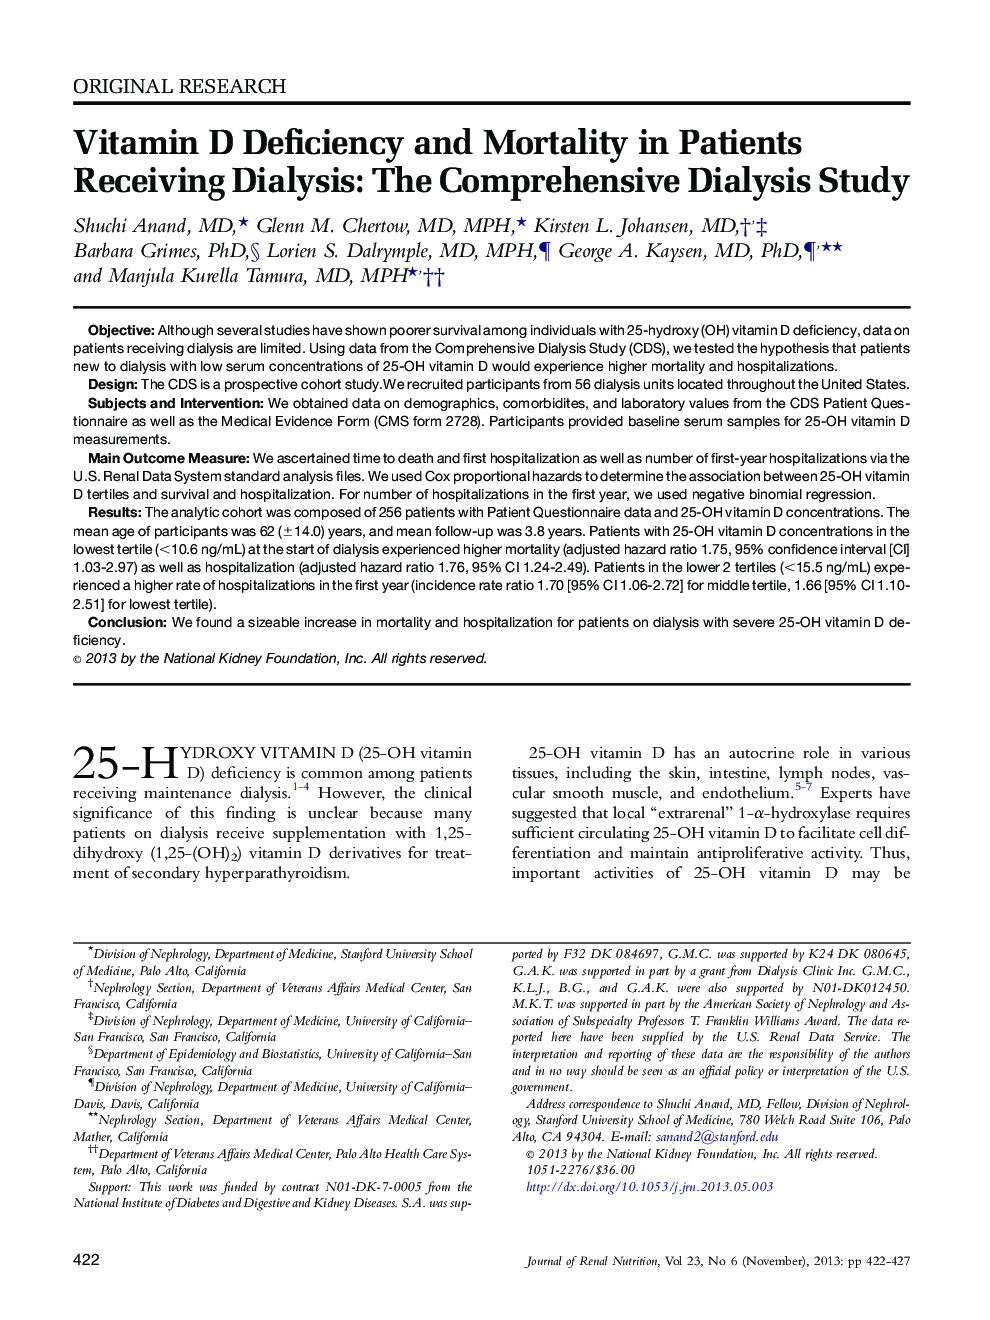 Vitamin D Deficiency and Mortality in Patients Receiving Dialysis: The Comprehensive Dialysis Study